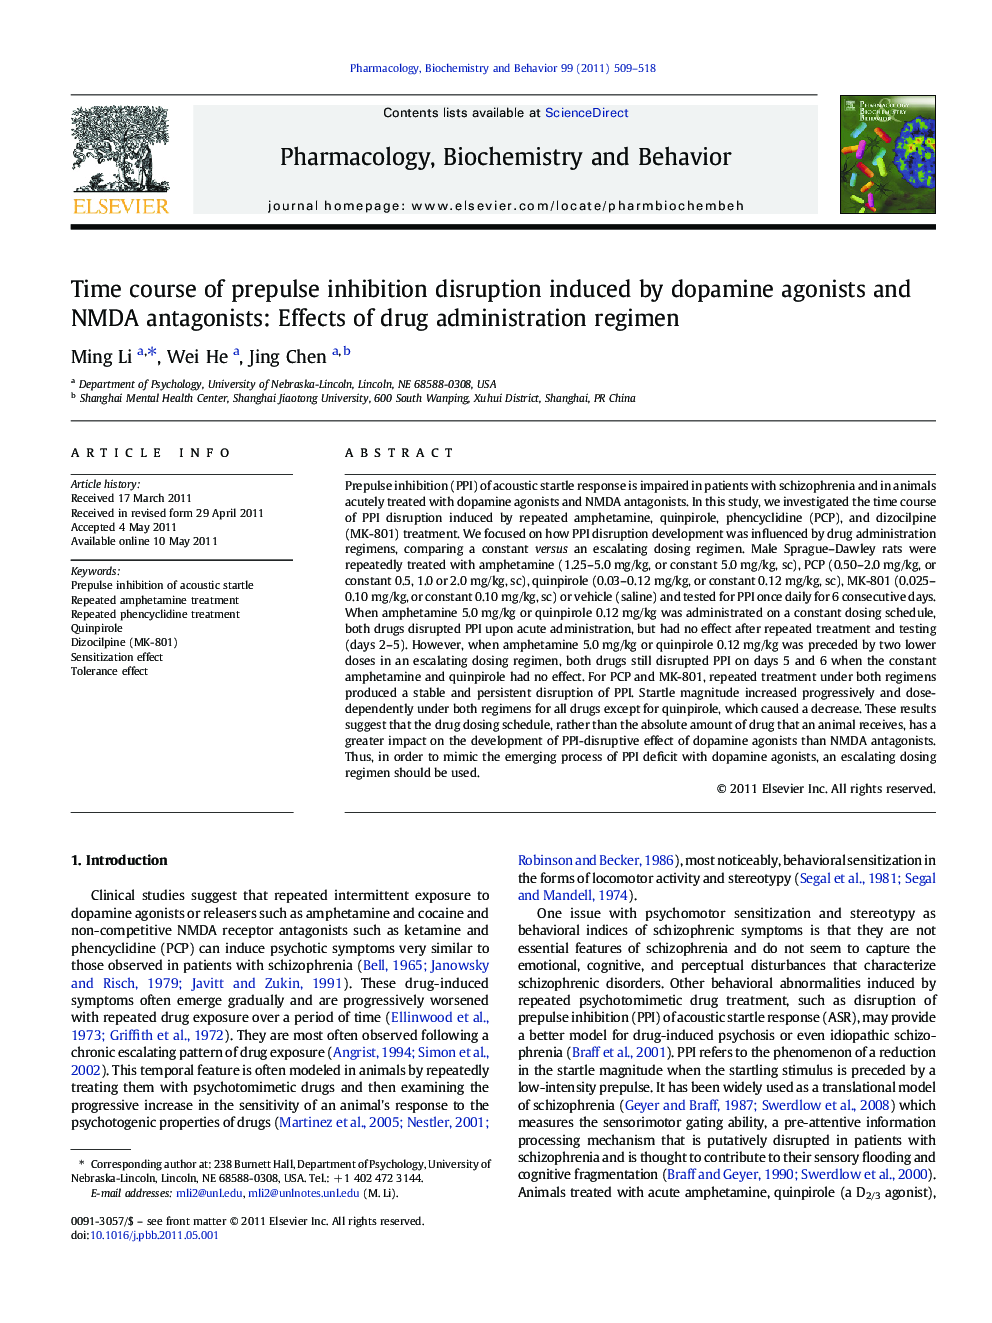 Time course of prepulse inhibition disruption induced by dopamine agonists and NMDA antagonists: Effects of drug administration regimen